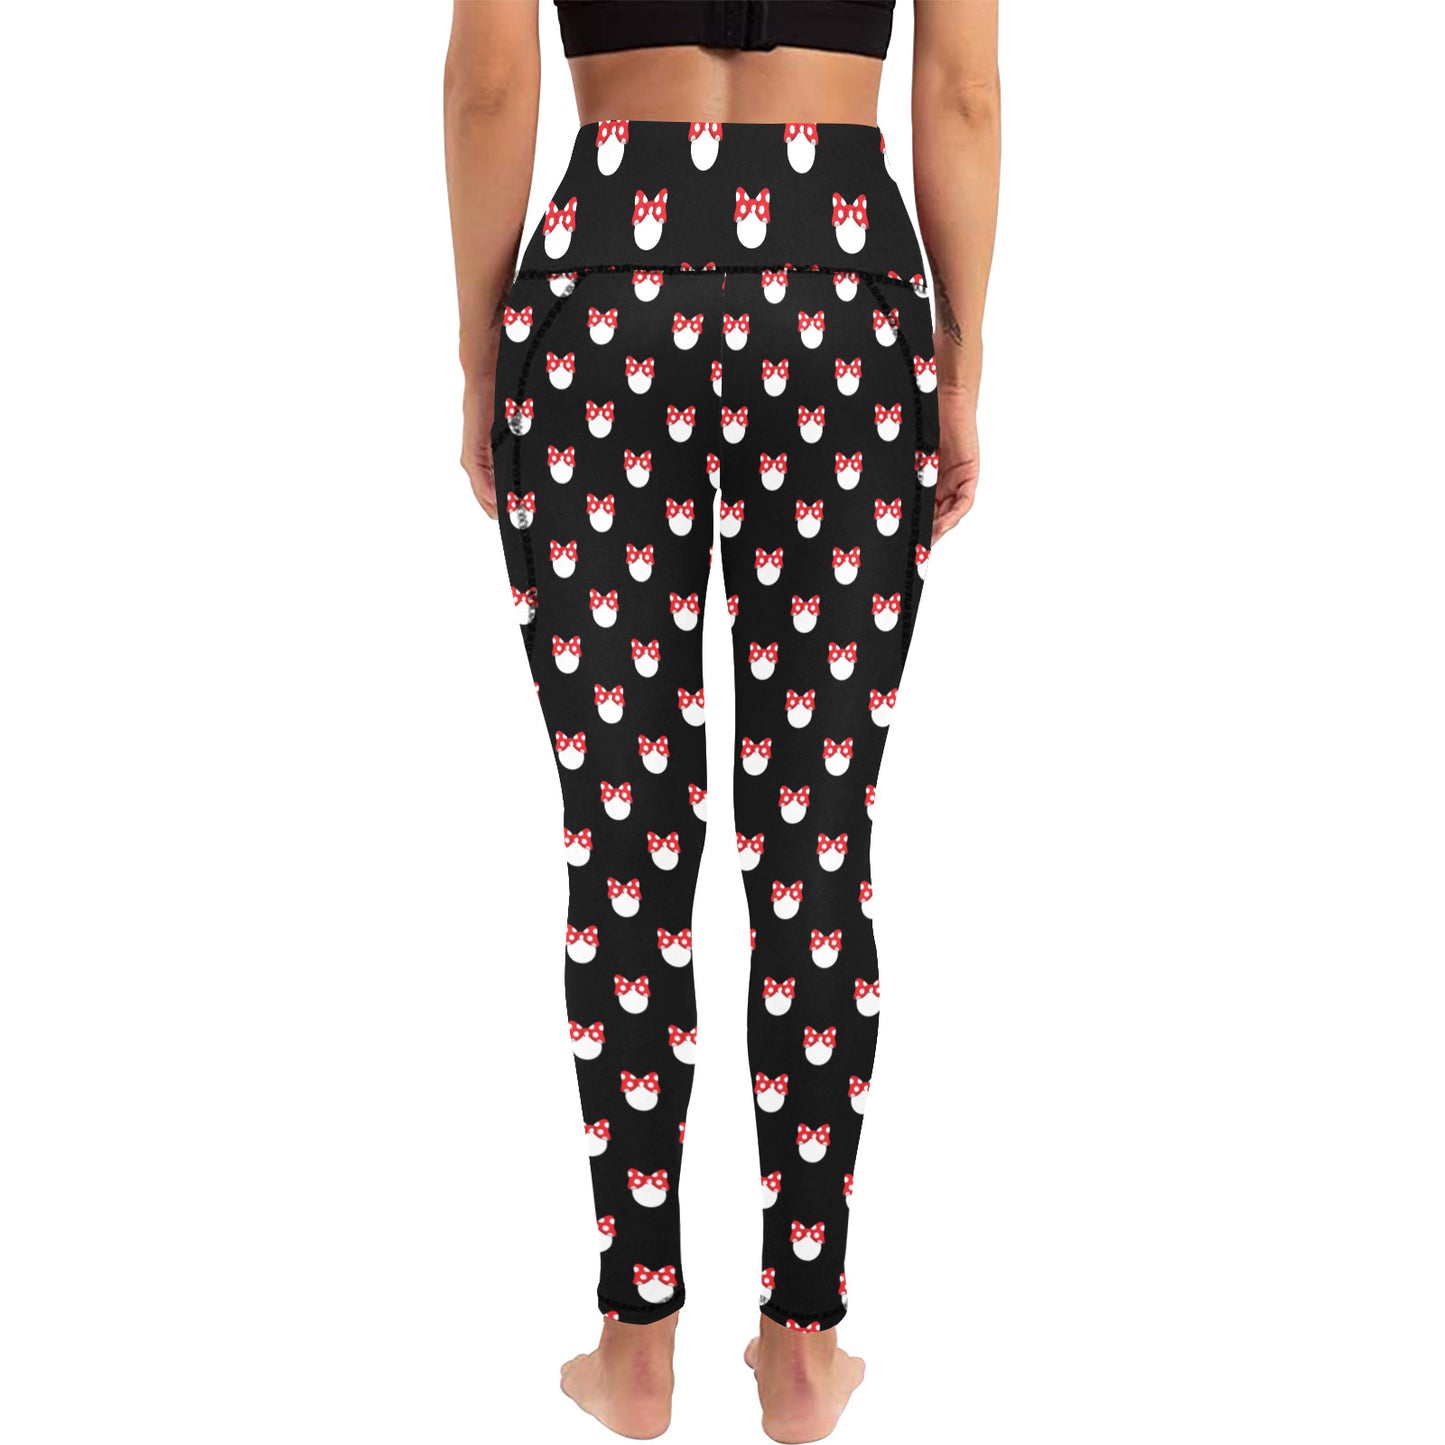 White Polka Dot Red Bow Women's Athletic Leggings With Pockets